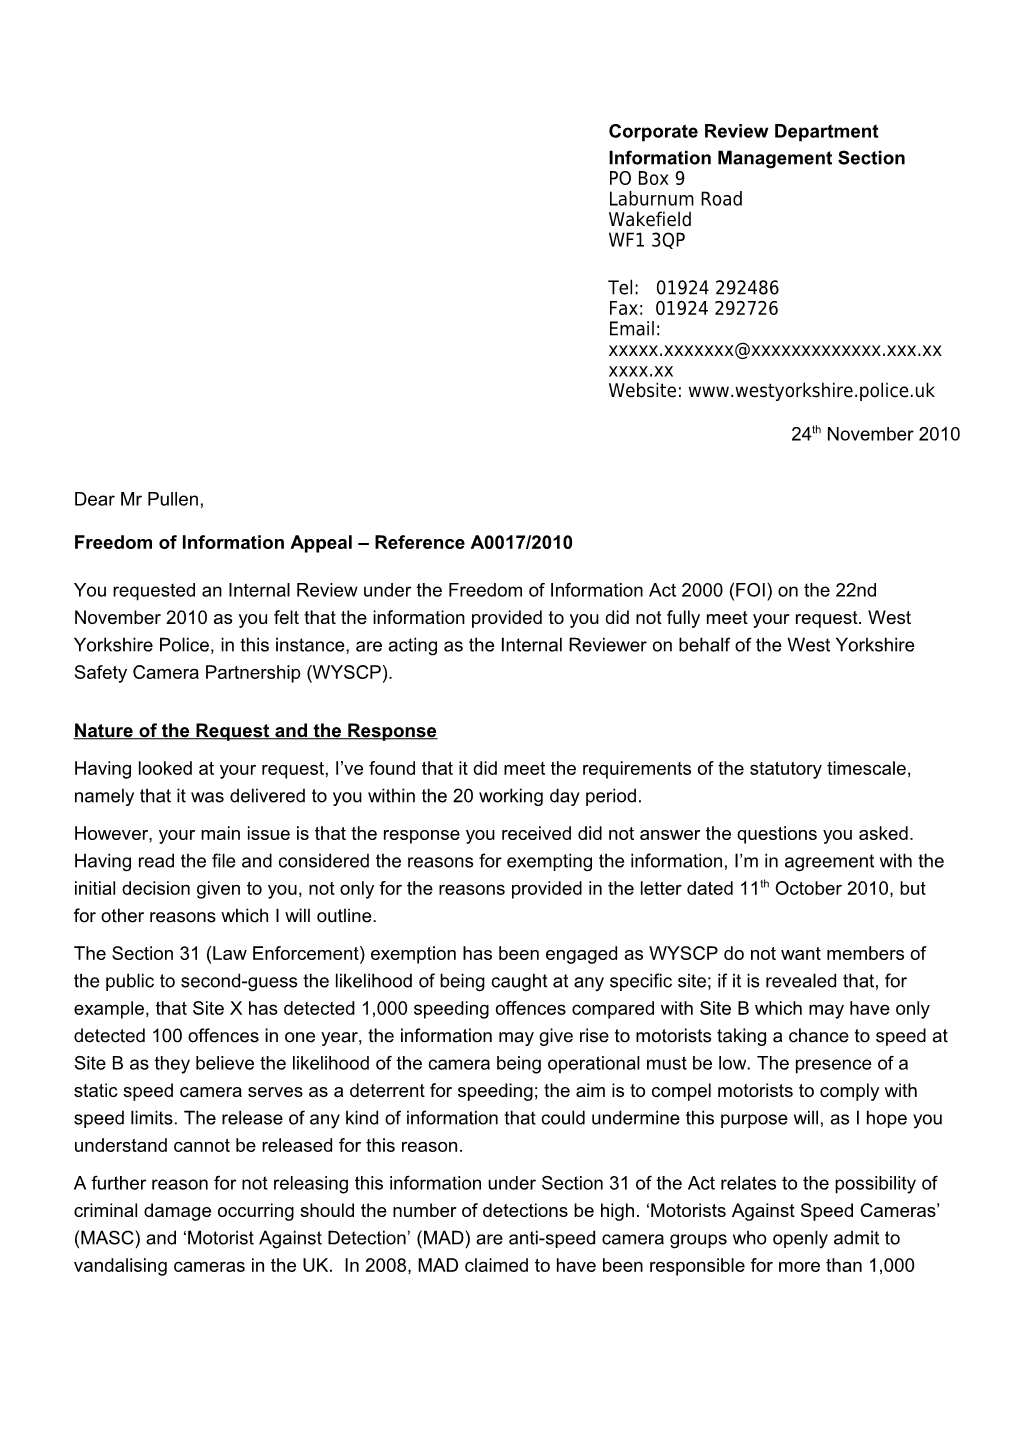 A0005 - Outcome of Appeal Letter (ISPG)